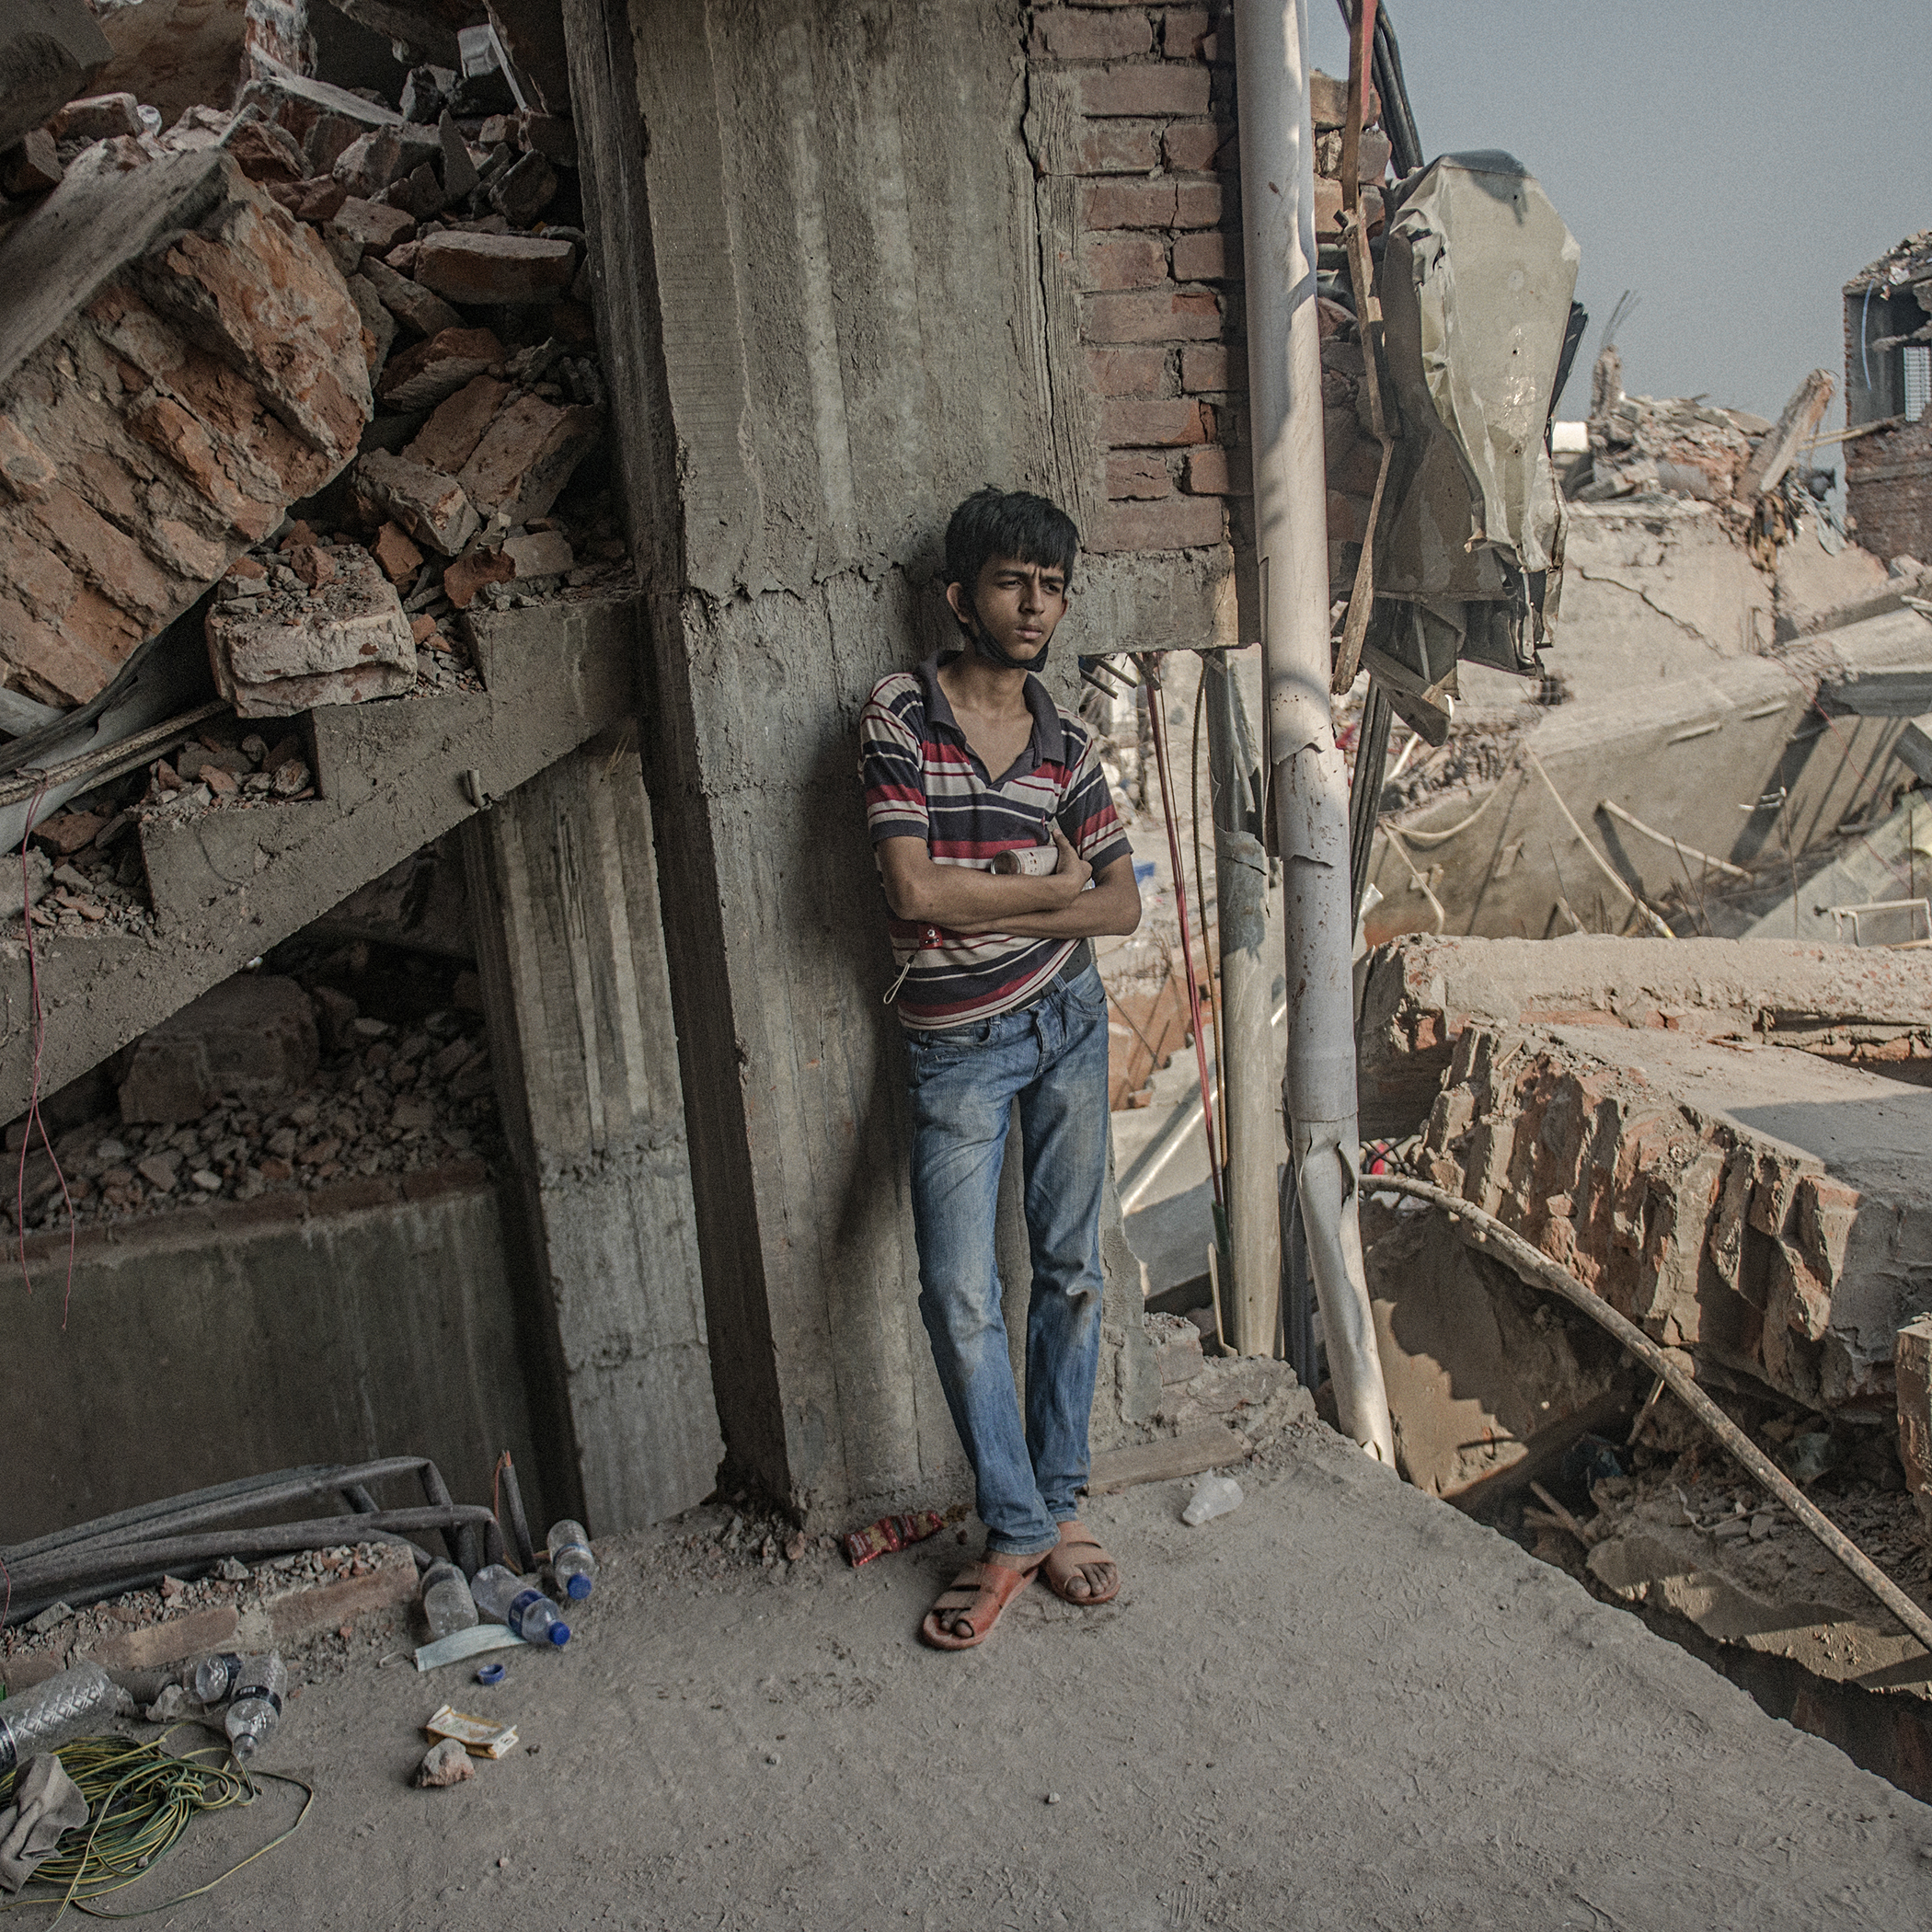 Monir Hossain Tushar, 16 at the time, rushed to the Rana Plaza site to work as a volunteer on rescue operations after the collapse